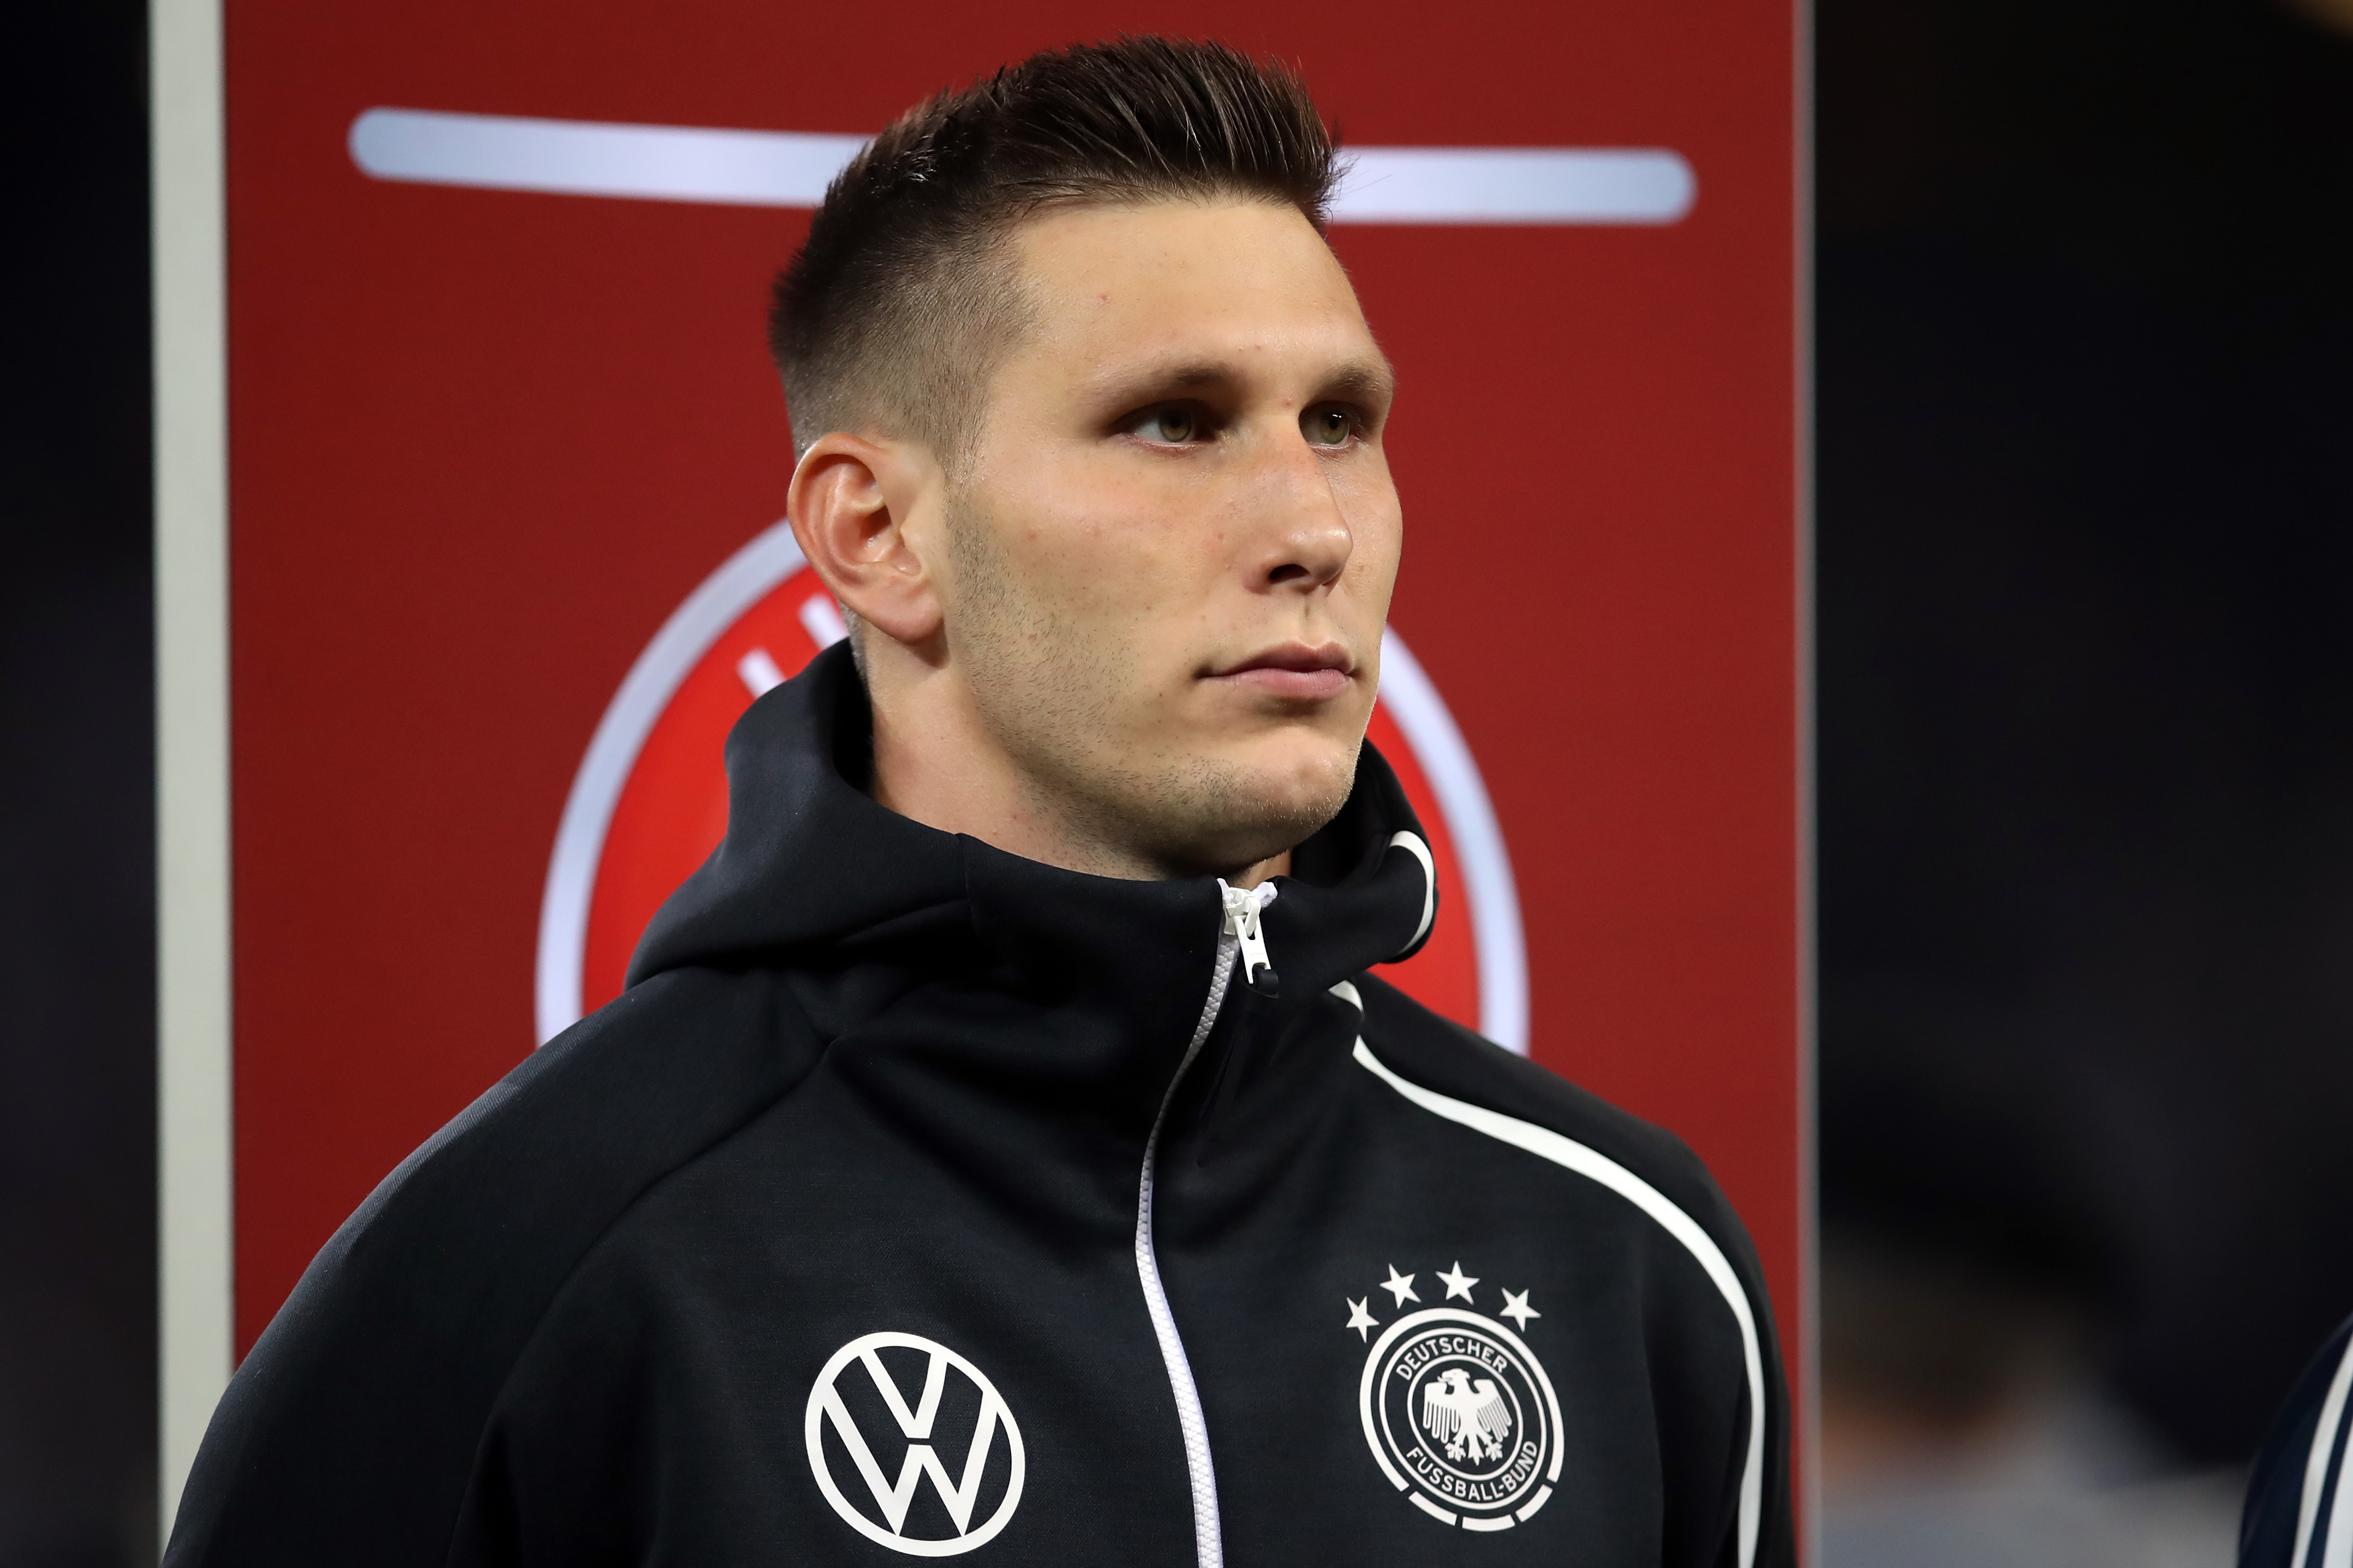 HAMBURG, GERMANY - SEPTEMBER 06: Niklas Suele of Germany looks on prior to the UEFA Euro 2020 qualifier match between Germany and Netherlands at Volksparkstadion on September 06, 2019 in Hamburg, Germany. (Photo by Alex Grimm/Bongarts/Getty Images)